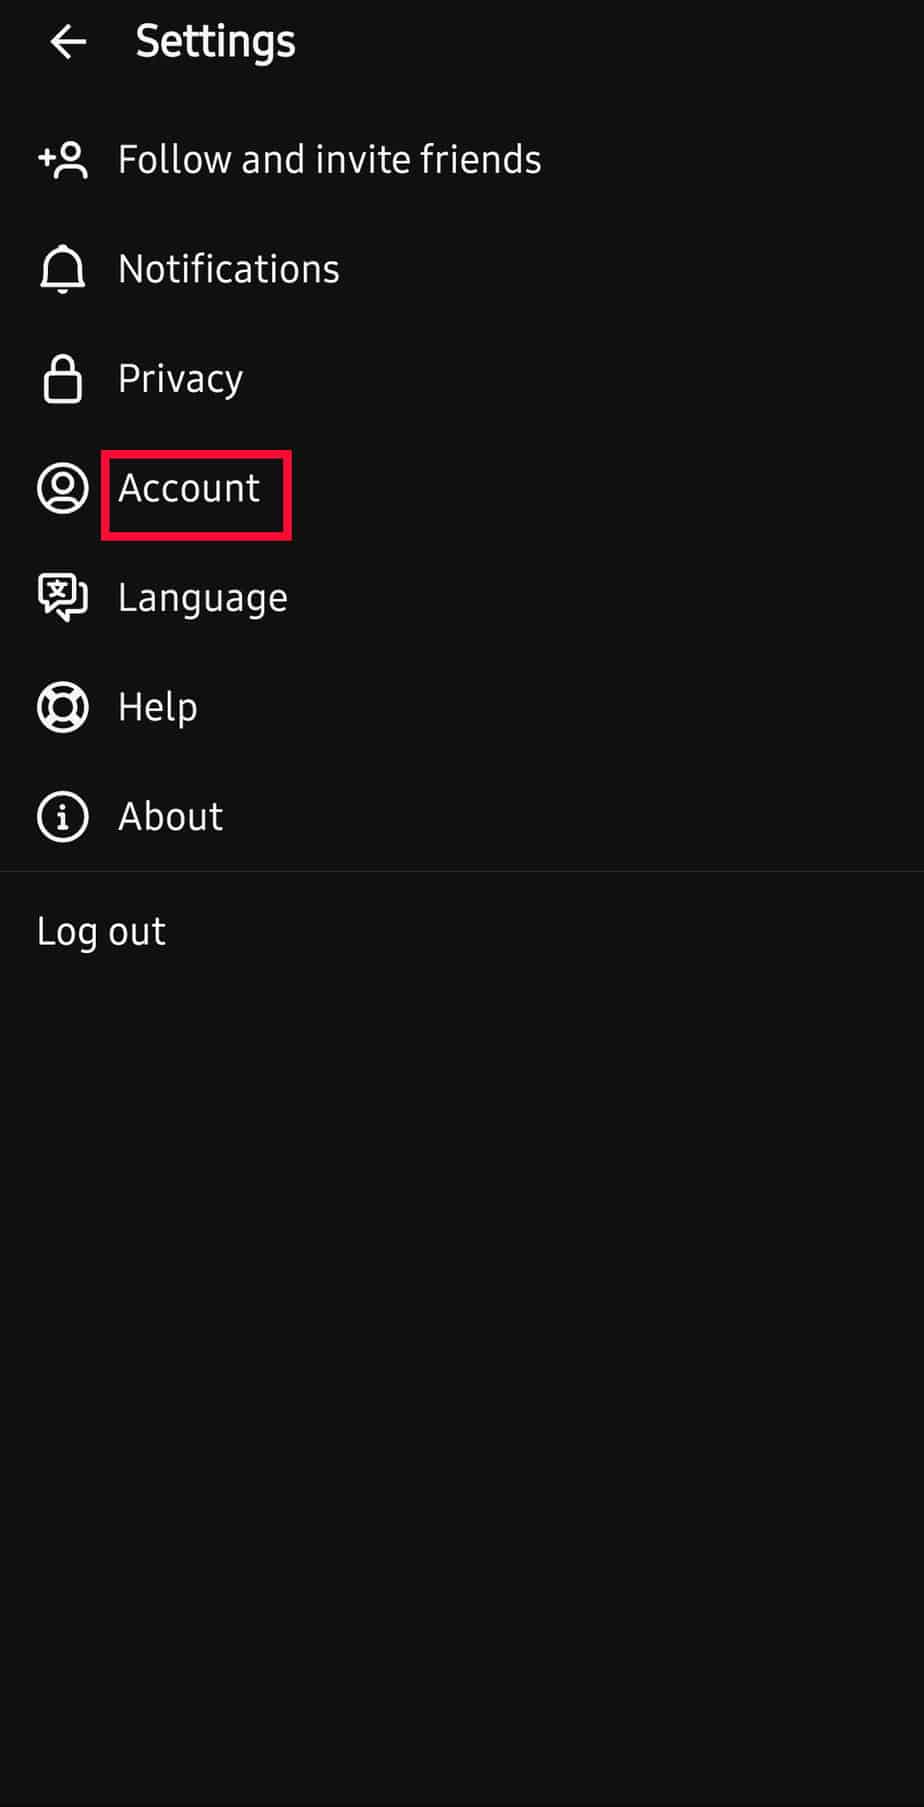 Click on the Account option